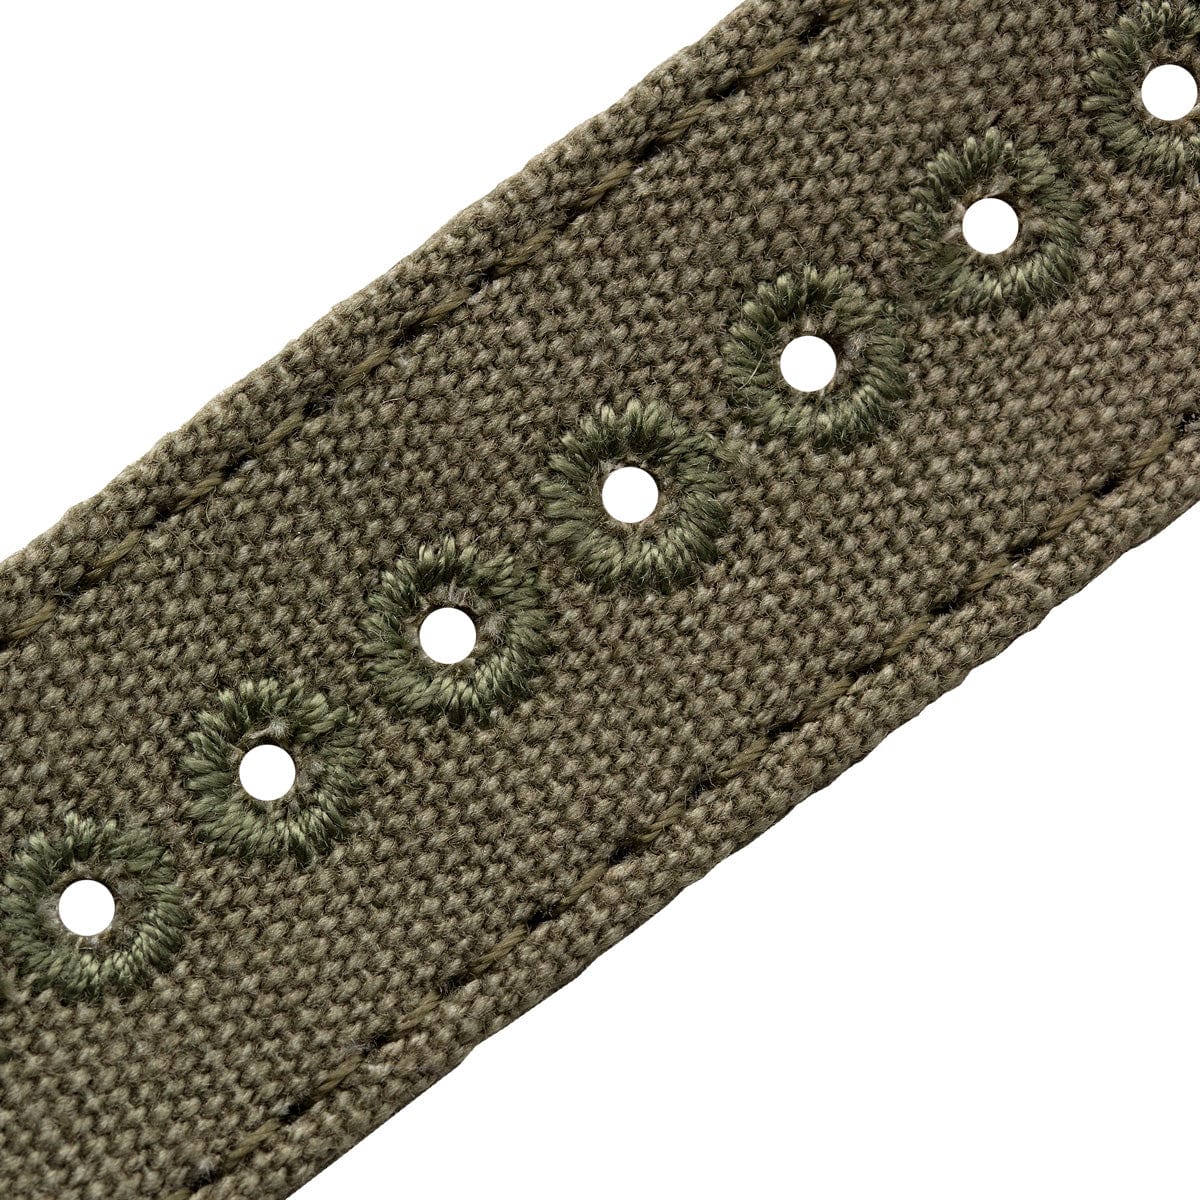 ZULUDIVER Vintage Canvas Military Watch Strap - Army Green